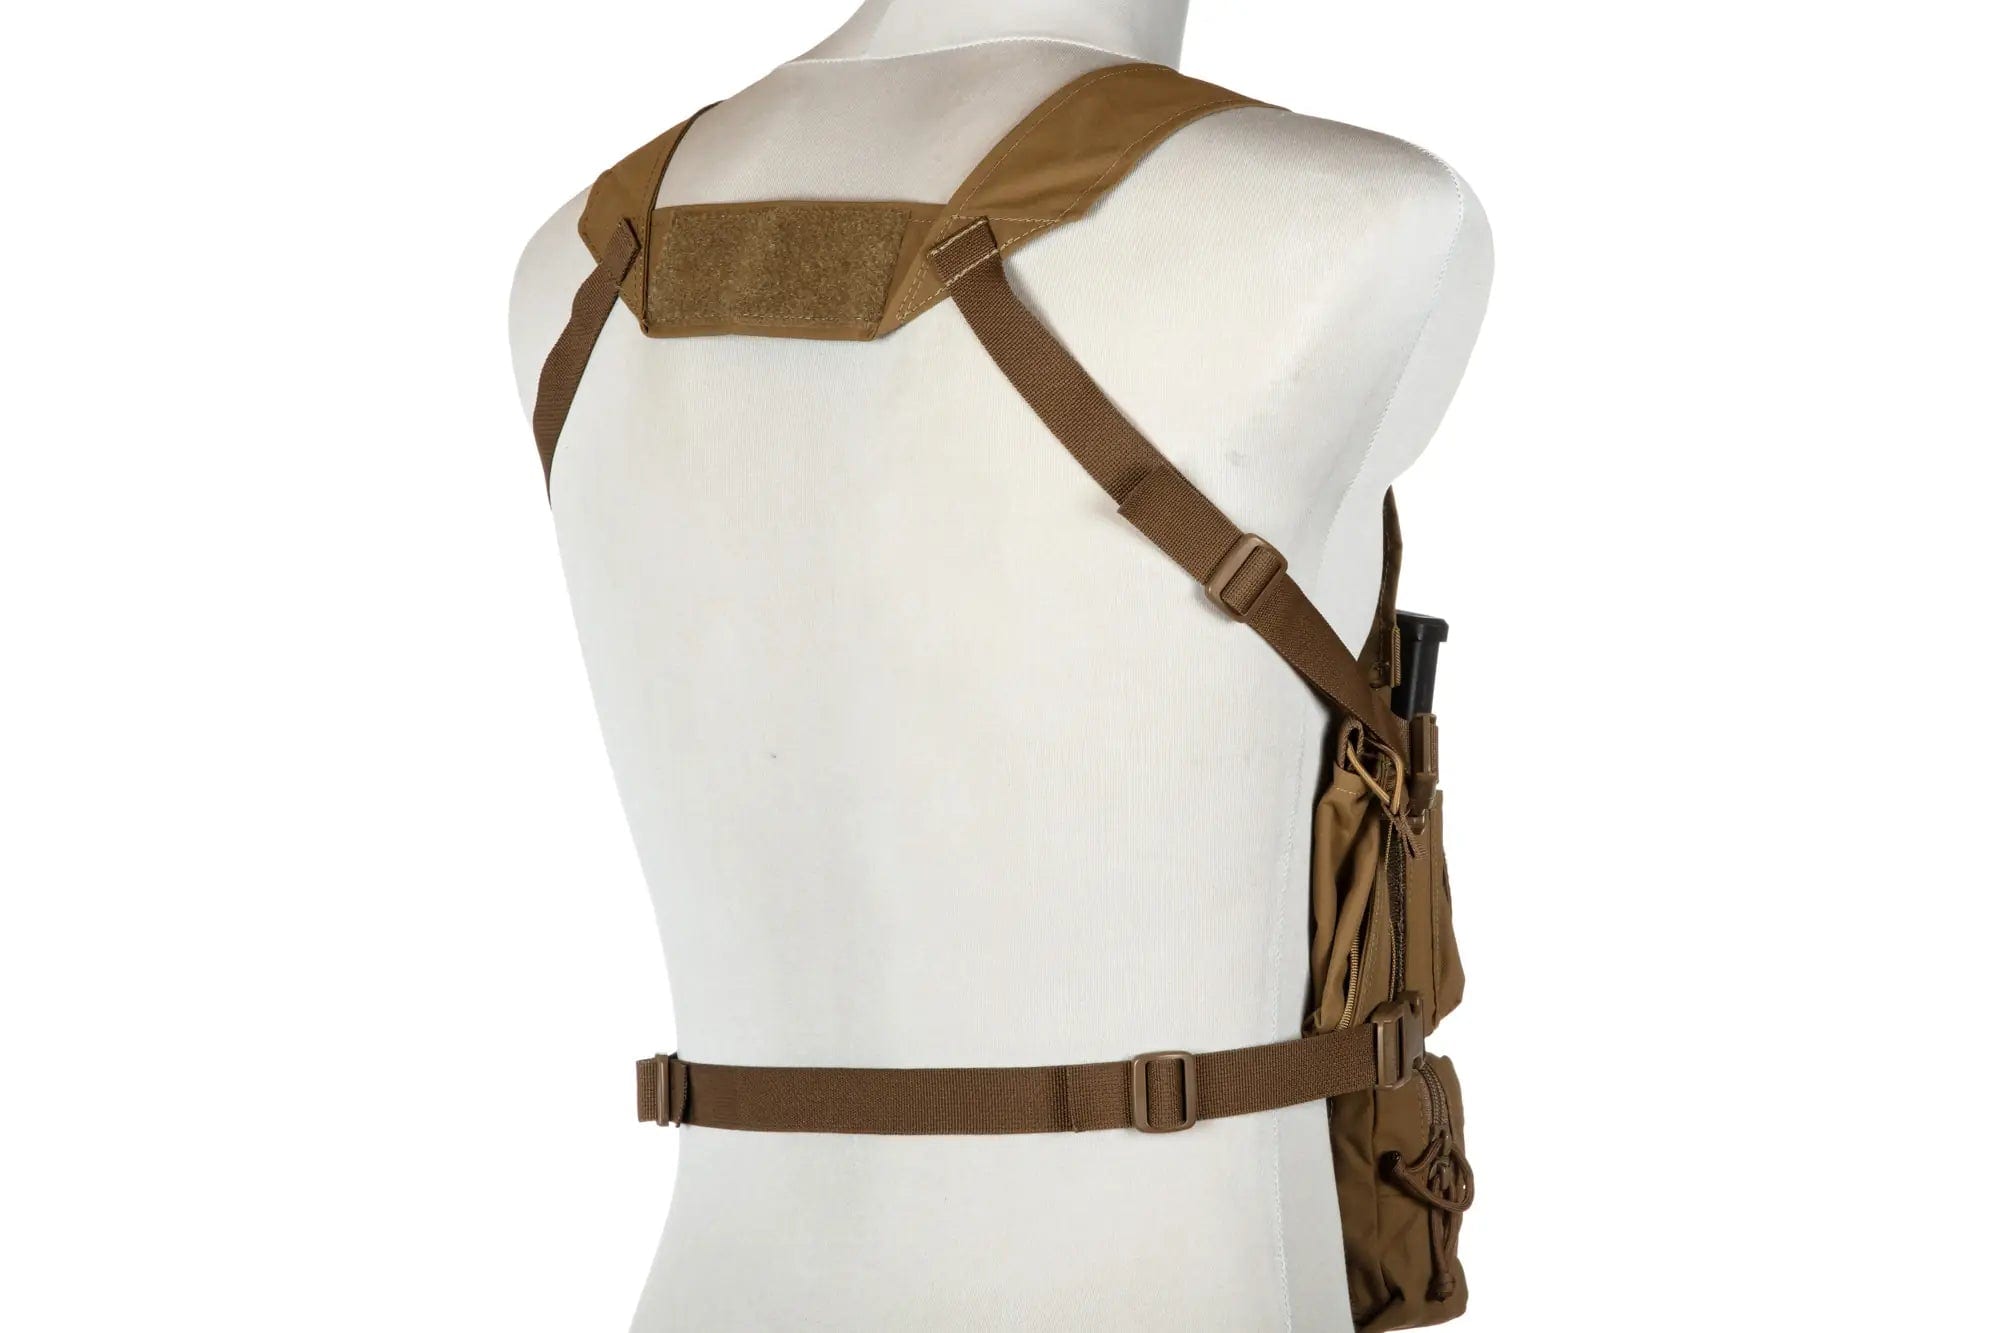 Tactical Chest Rig MK4 Coyote